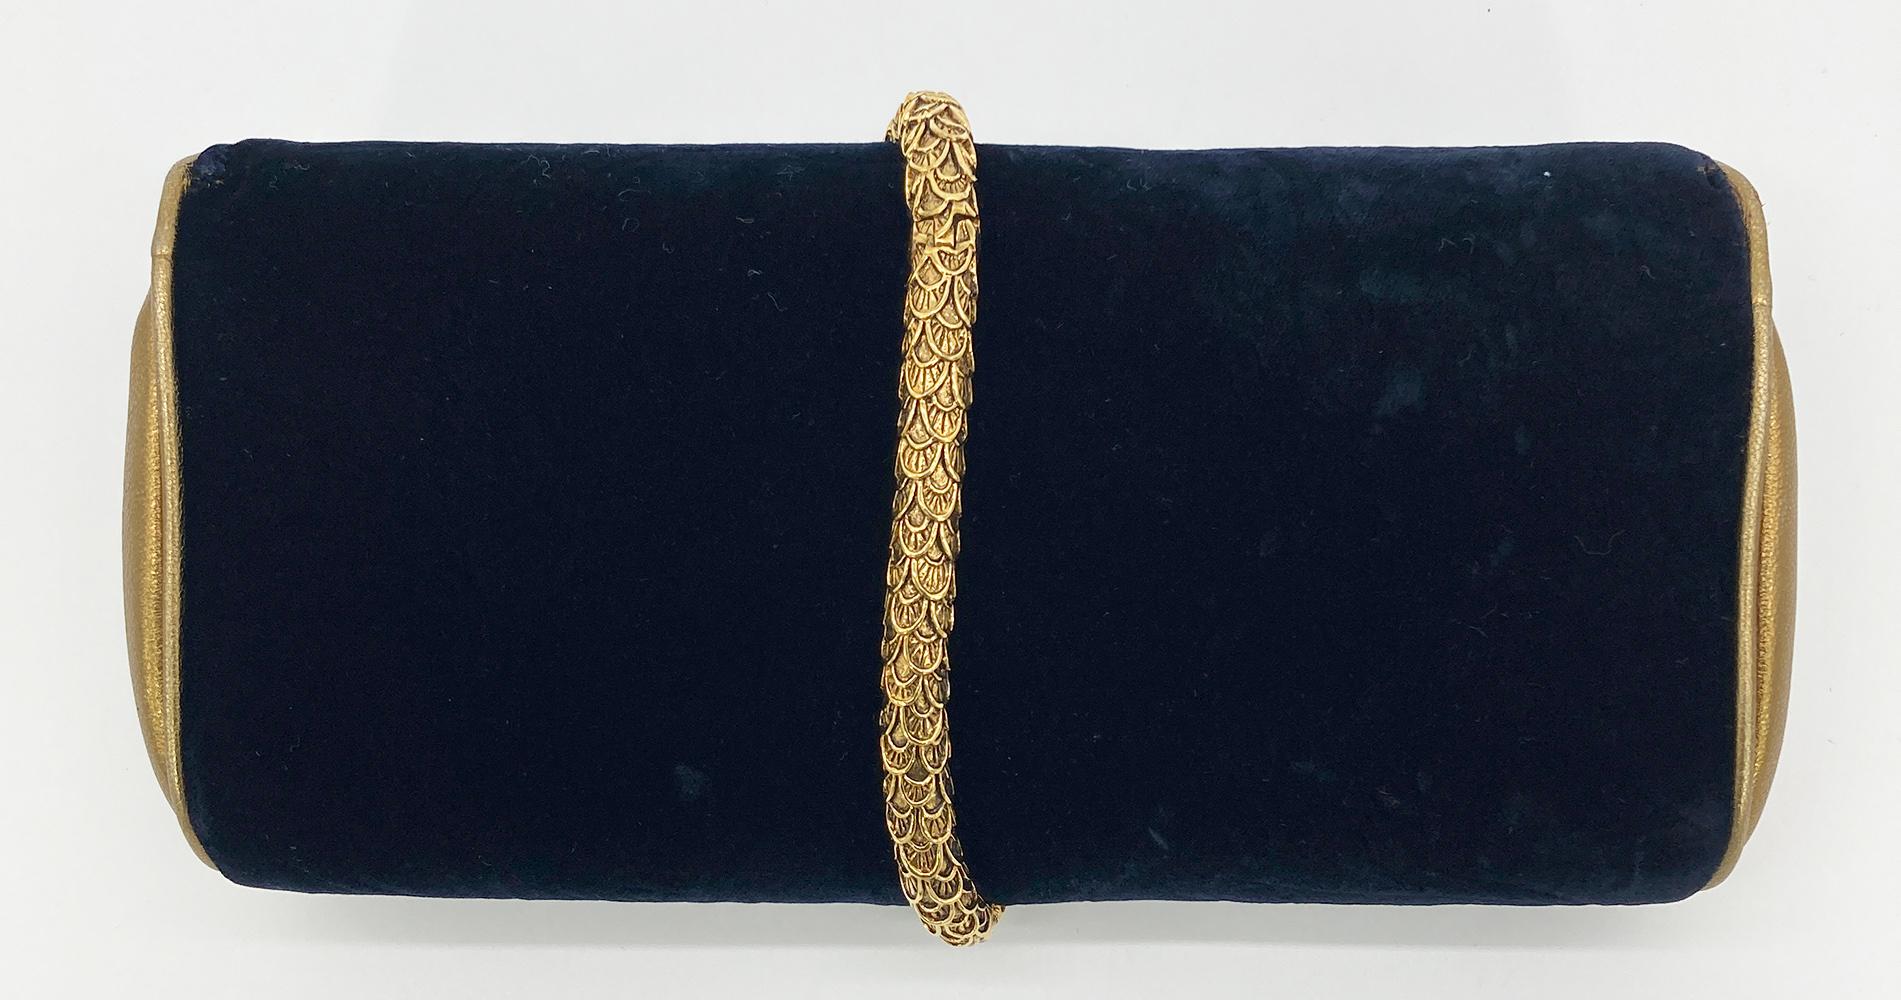 Roberto Cavalli Navy Velvet Gold Serpent Clutch in excellent condition. Navy velvet trimmed with metallic gold leather and gold metal snake embellished with tiny rhinestones. Velvet as a subtle rose embossing visible at certain angles and up close.